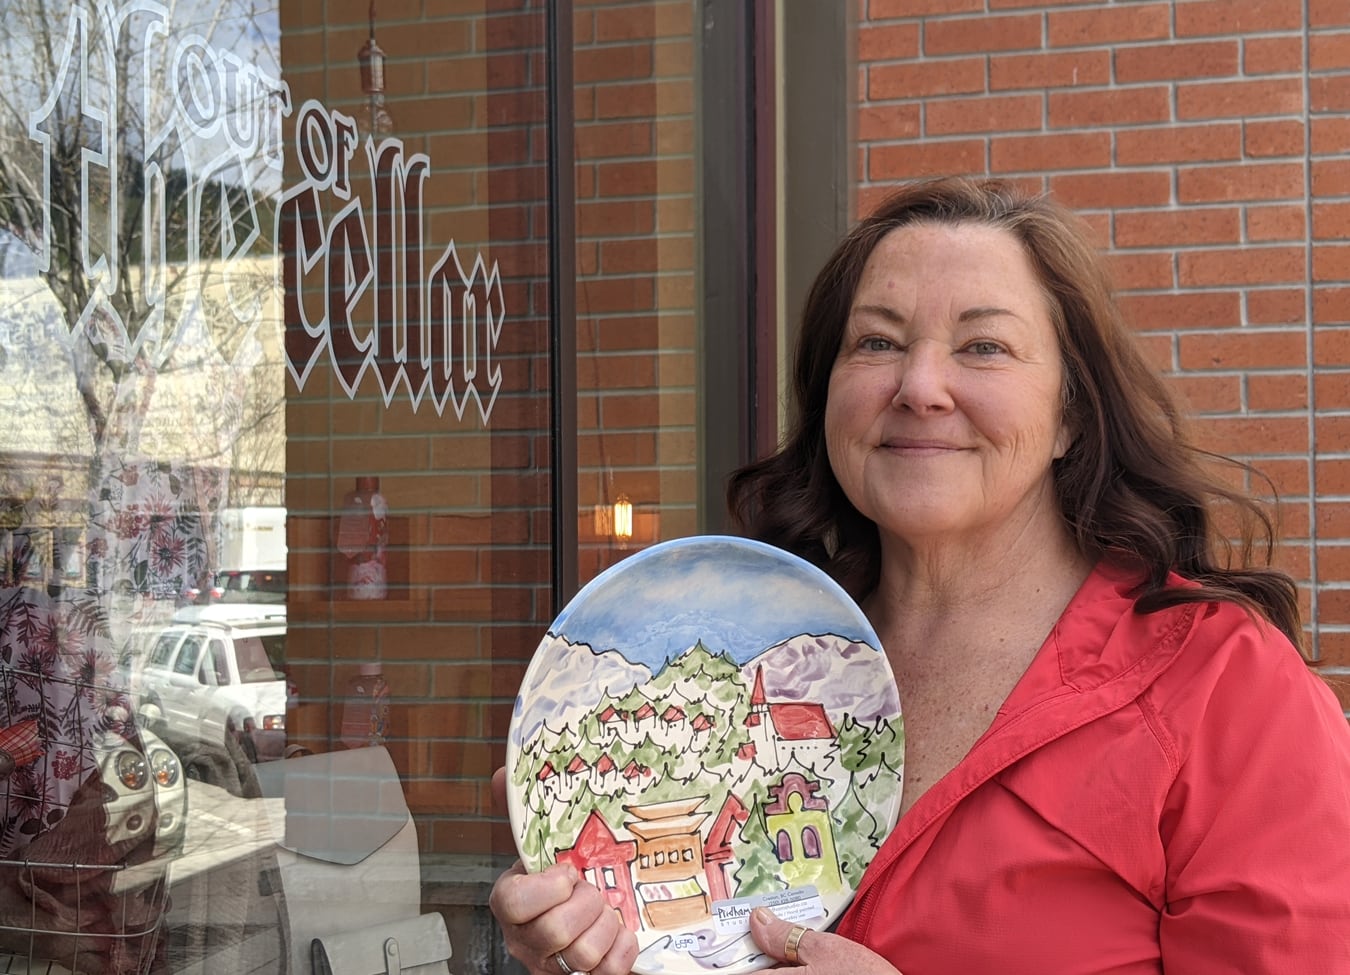 Rossland business adds beauty and glaze to iconic church’s fundraising campaign